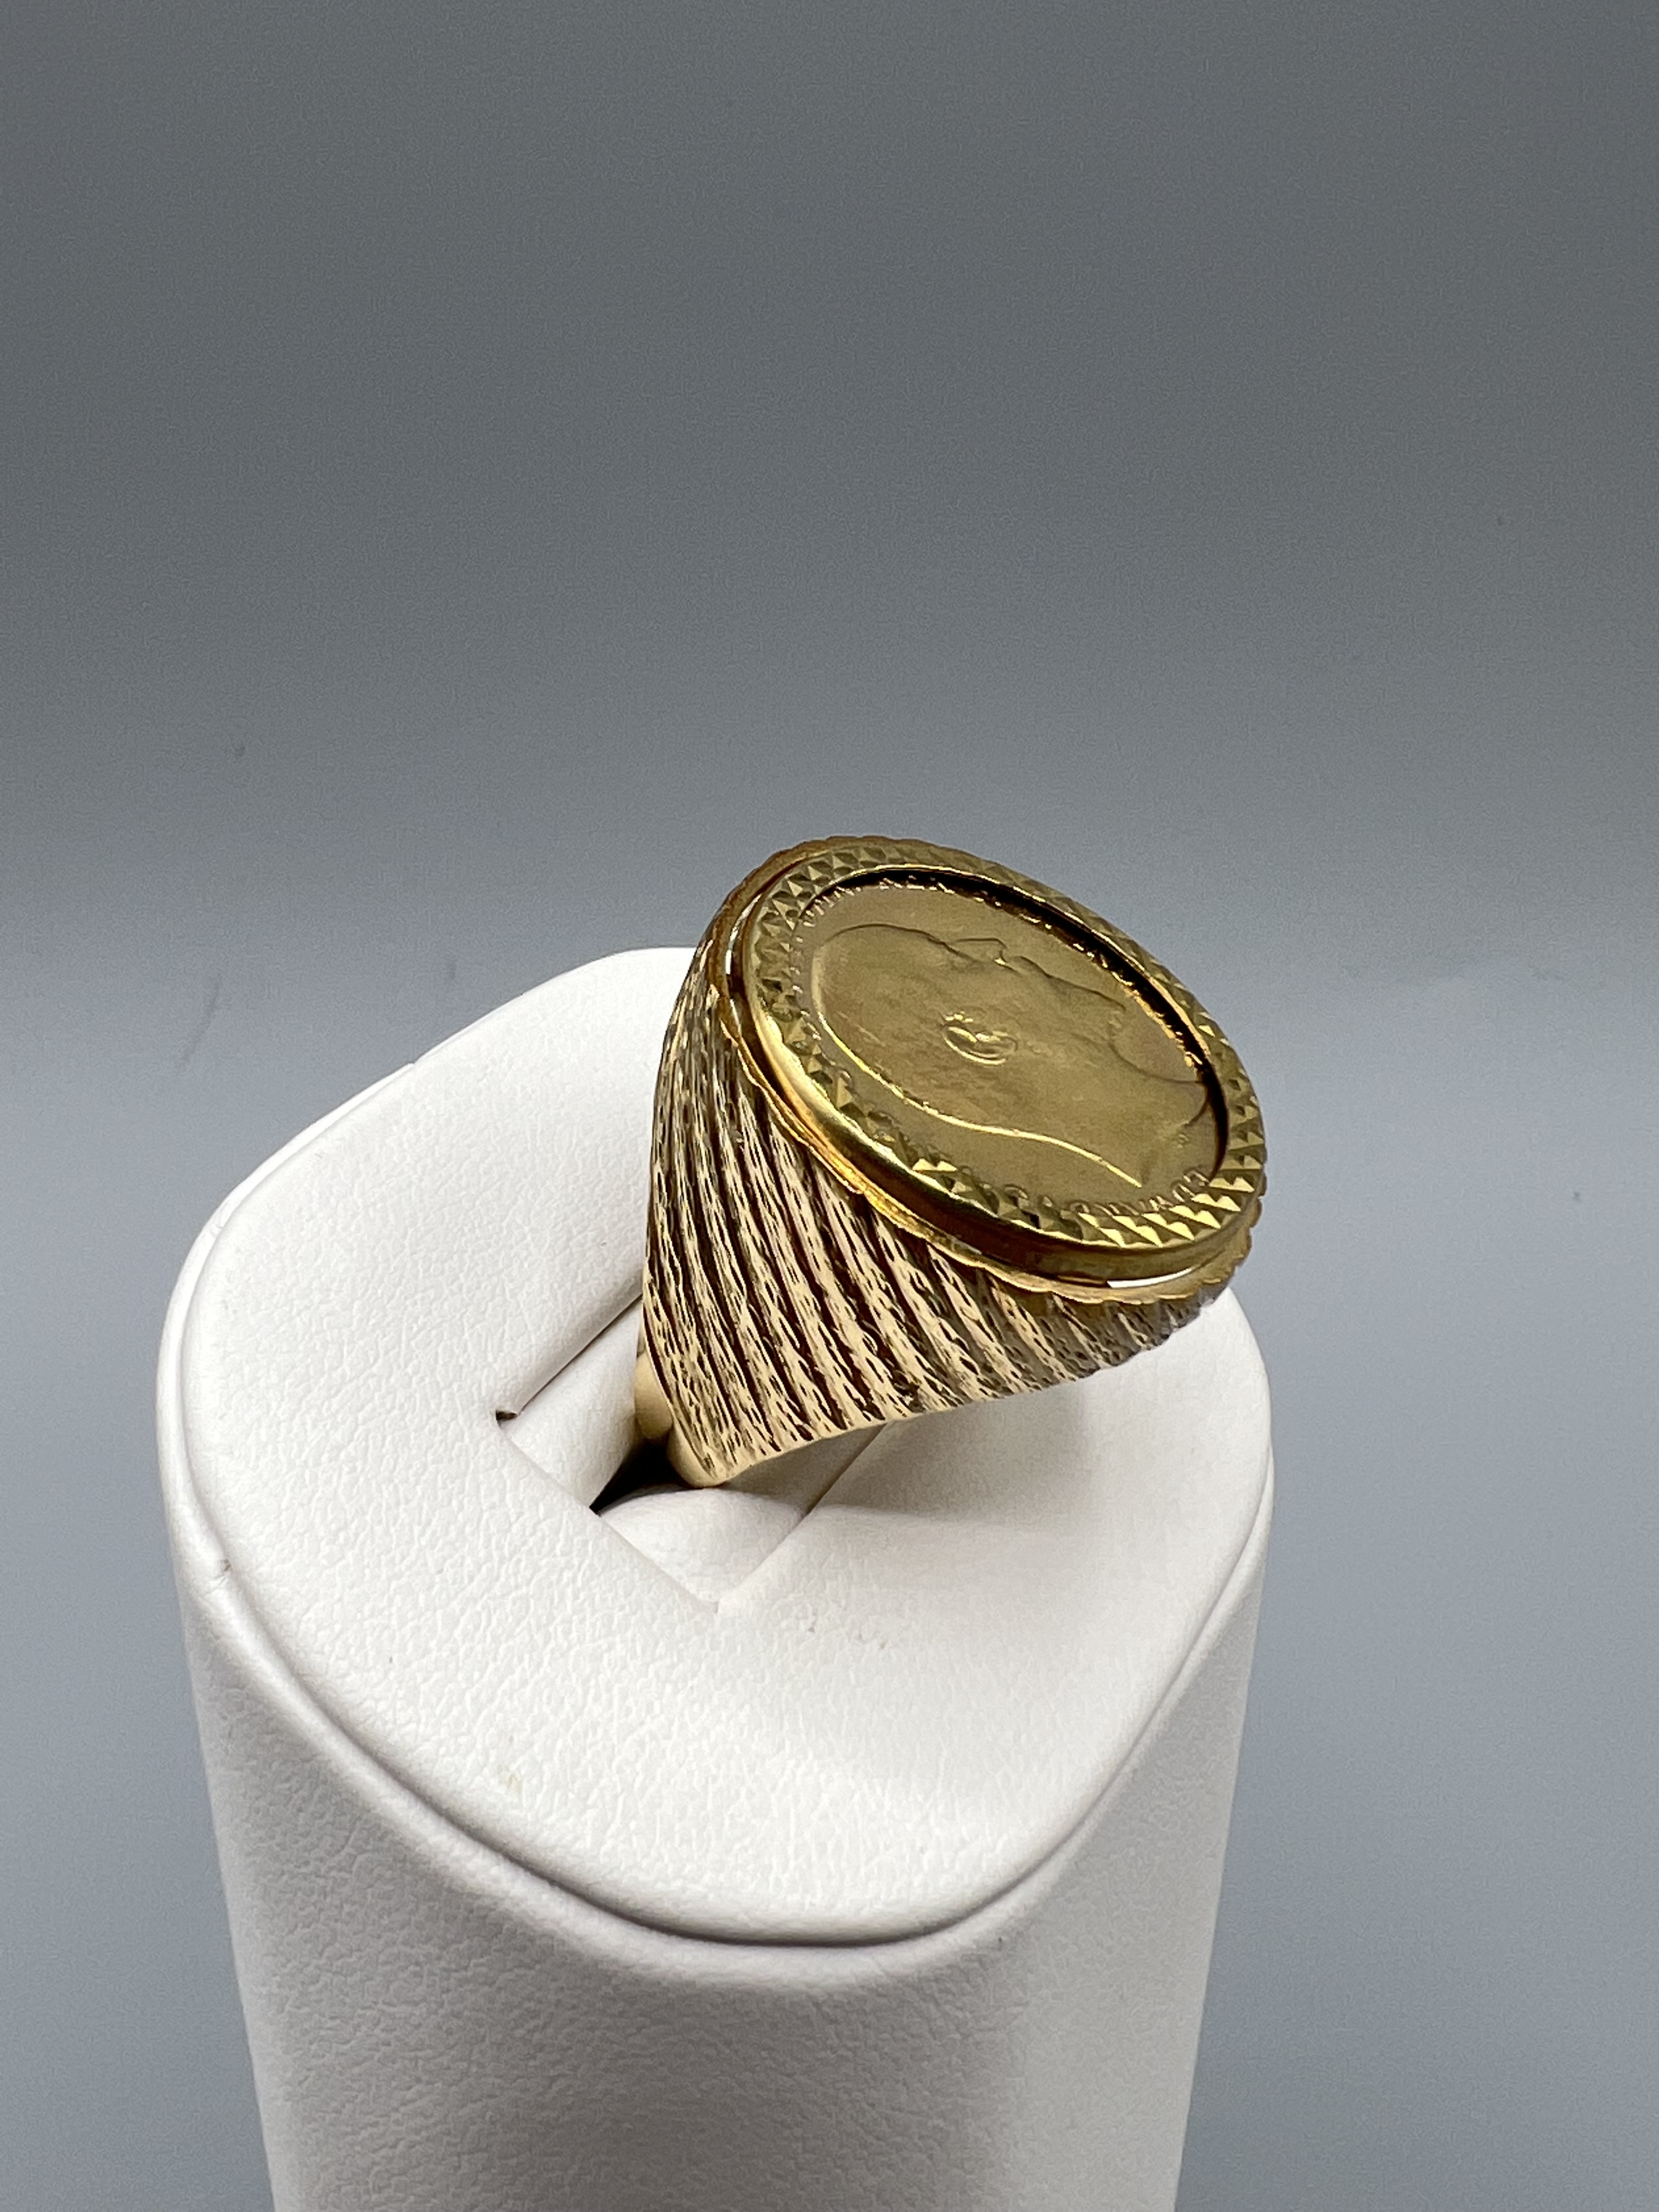 1910 Edward Vii Full Soverign Ring in 9ct Gold Mount Size X - 15.5grams - Image 3 of 3